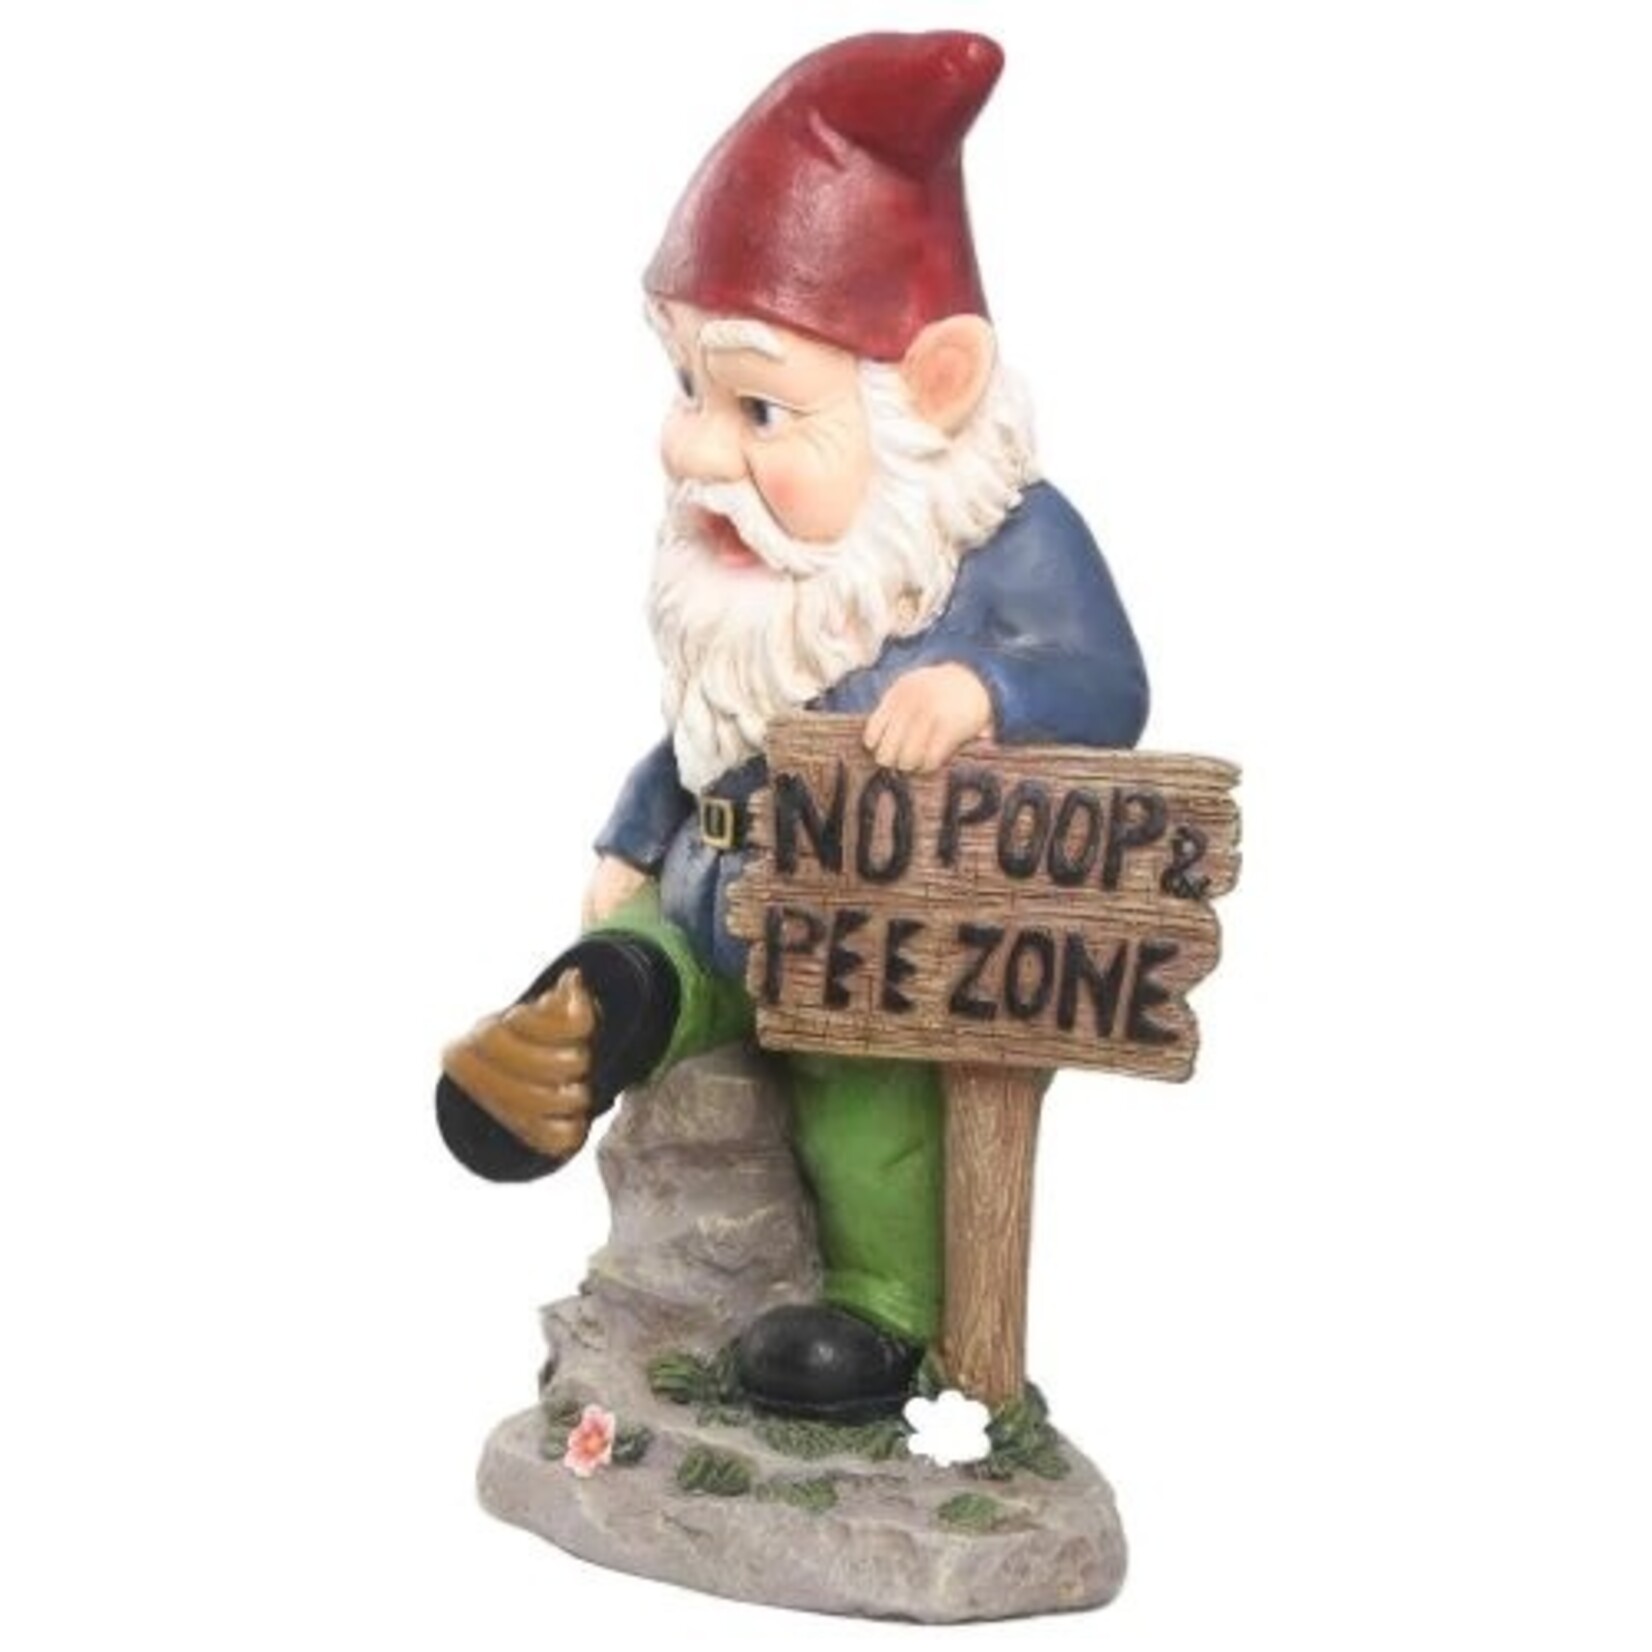 Gnome with sign - no poop